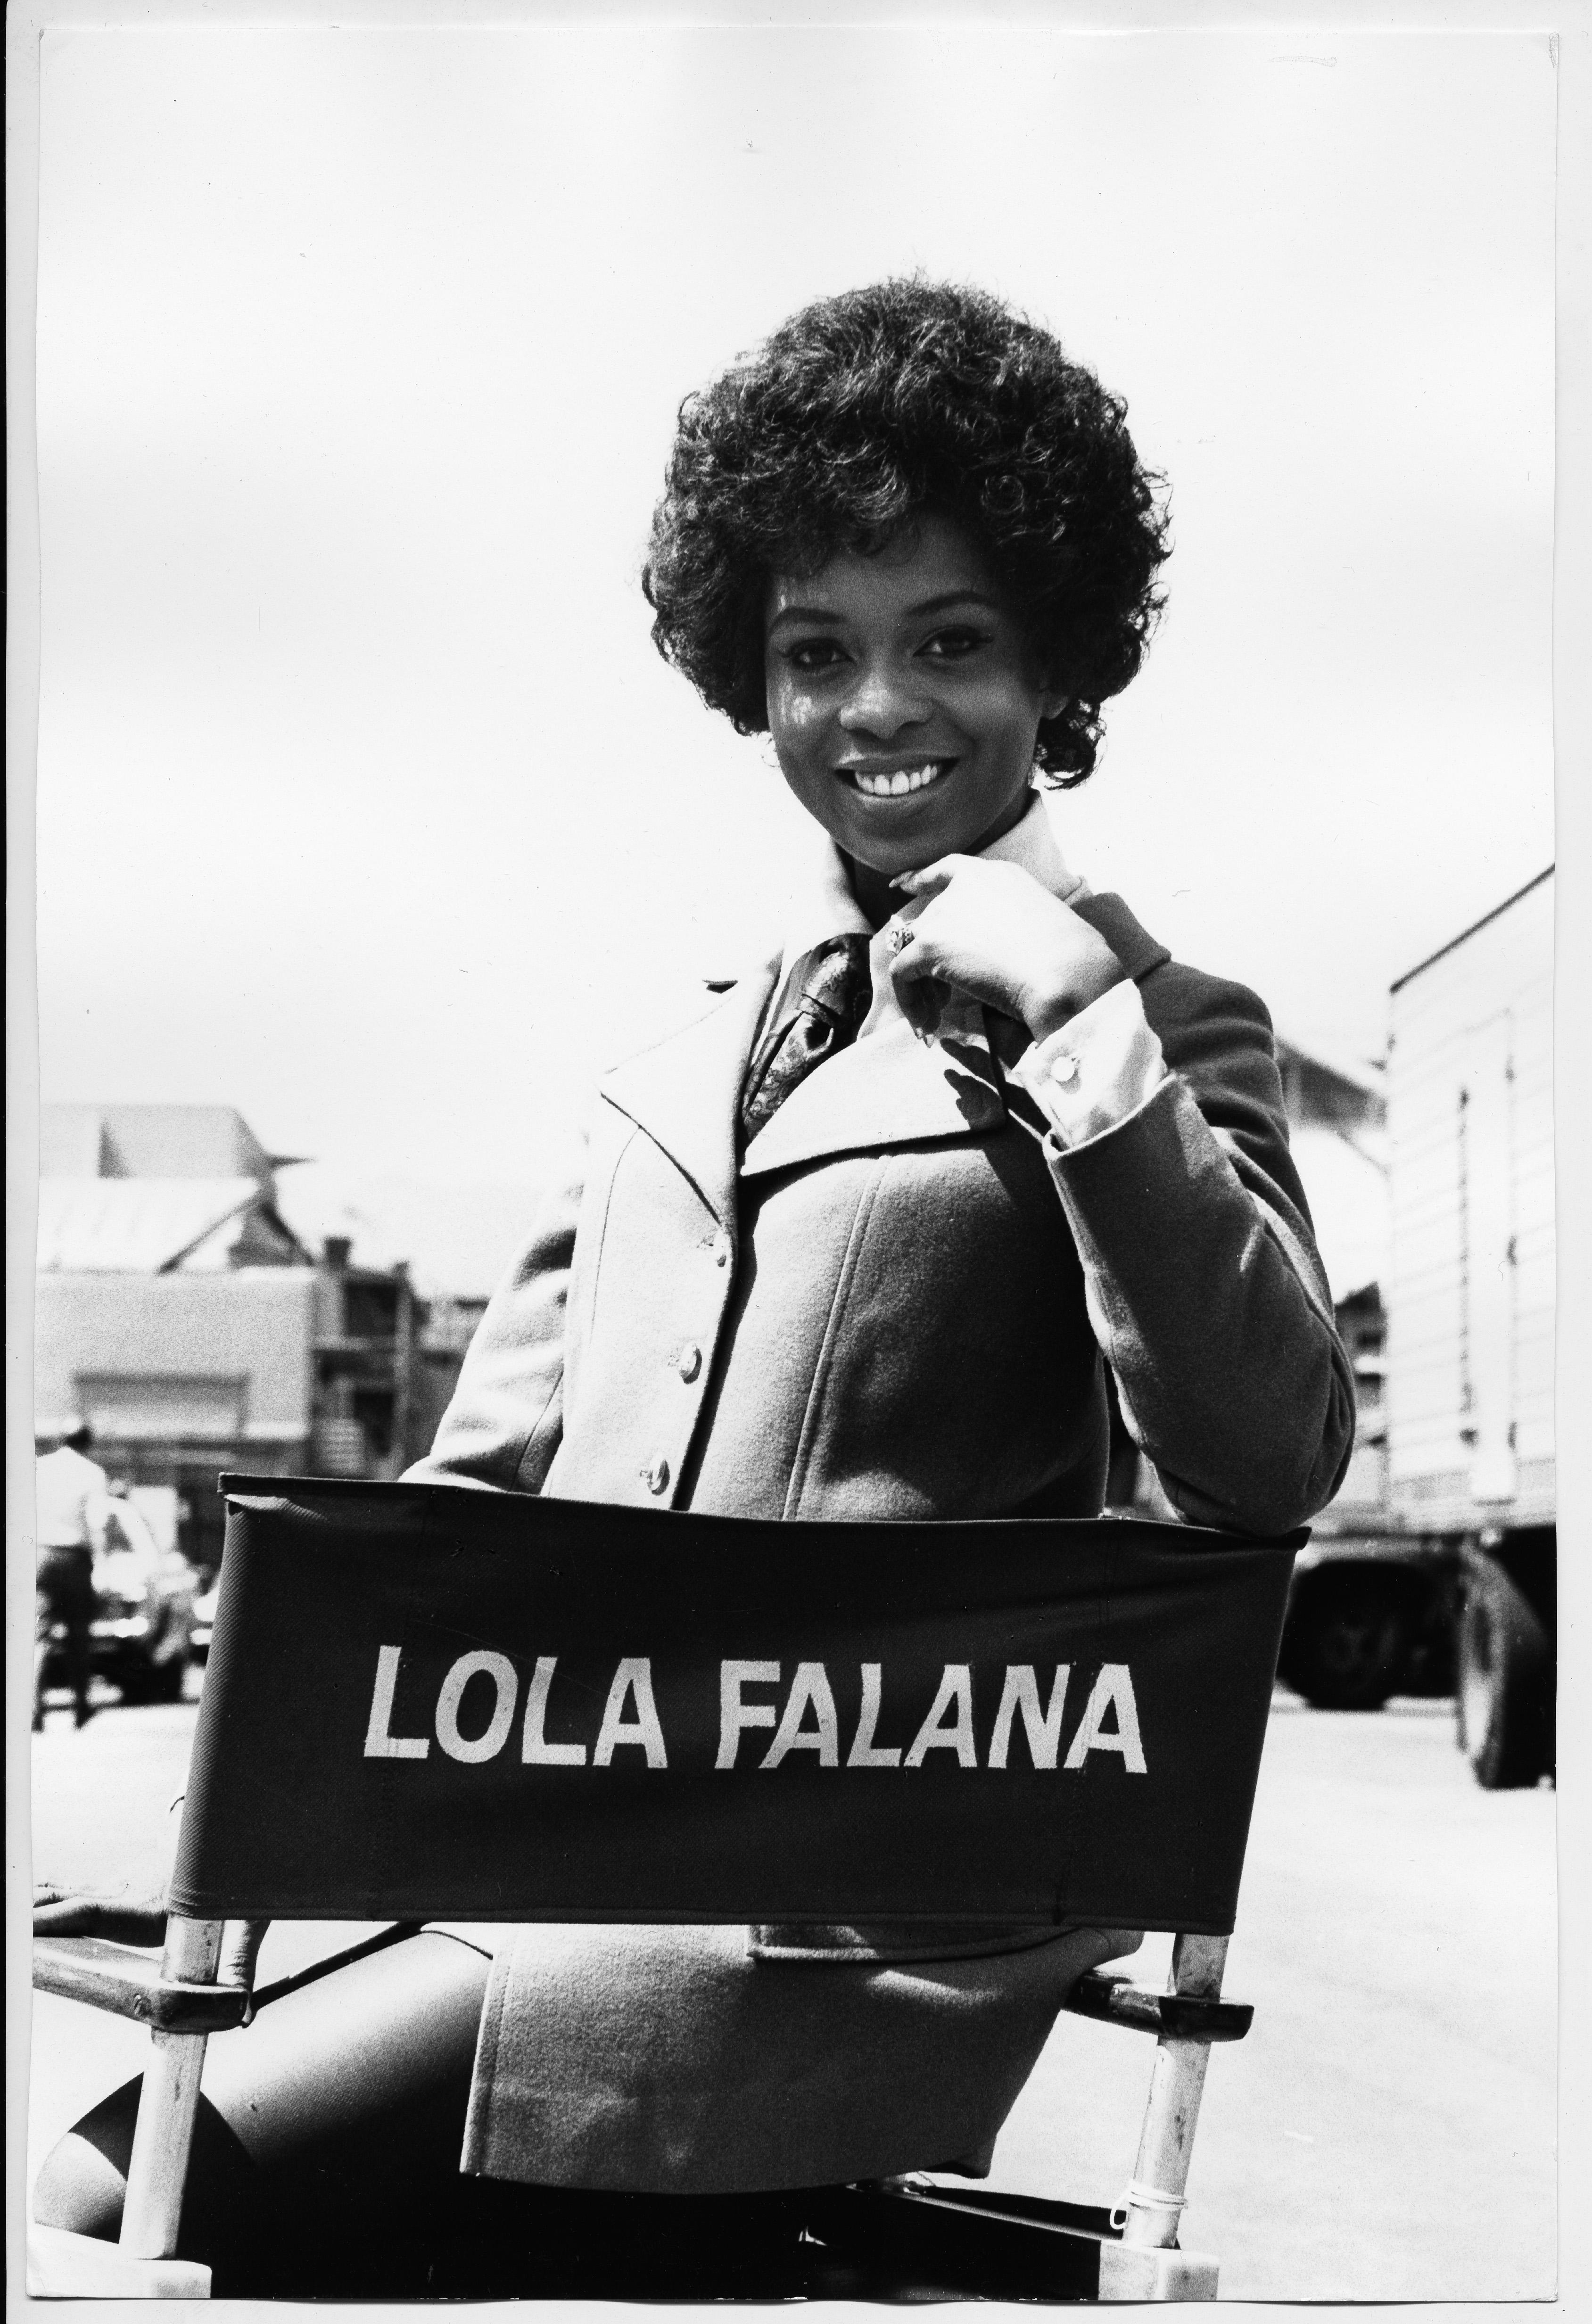 LOLA FALANA VINTAGE 8 X 10 PHOTOGRAPH FROM IRVING KLAWS ARCHIVES 